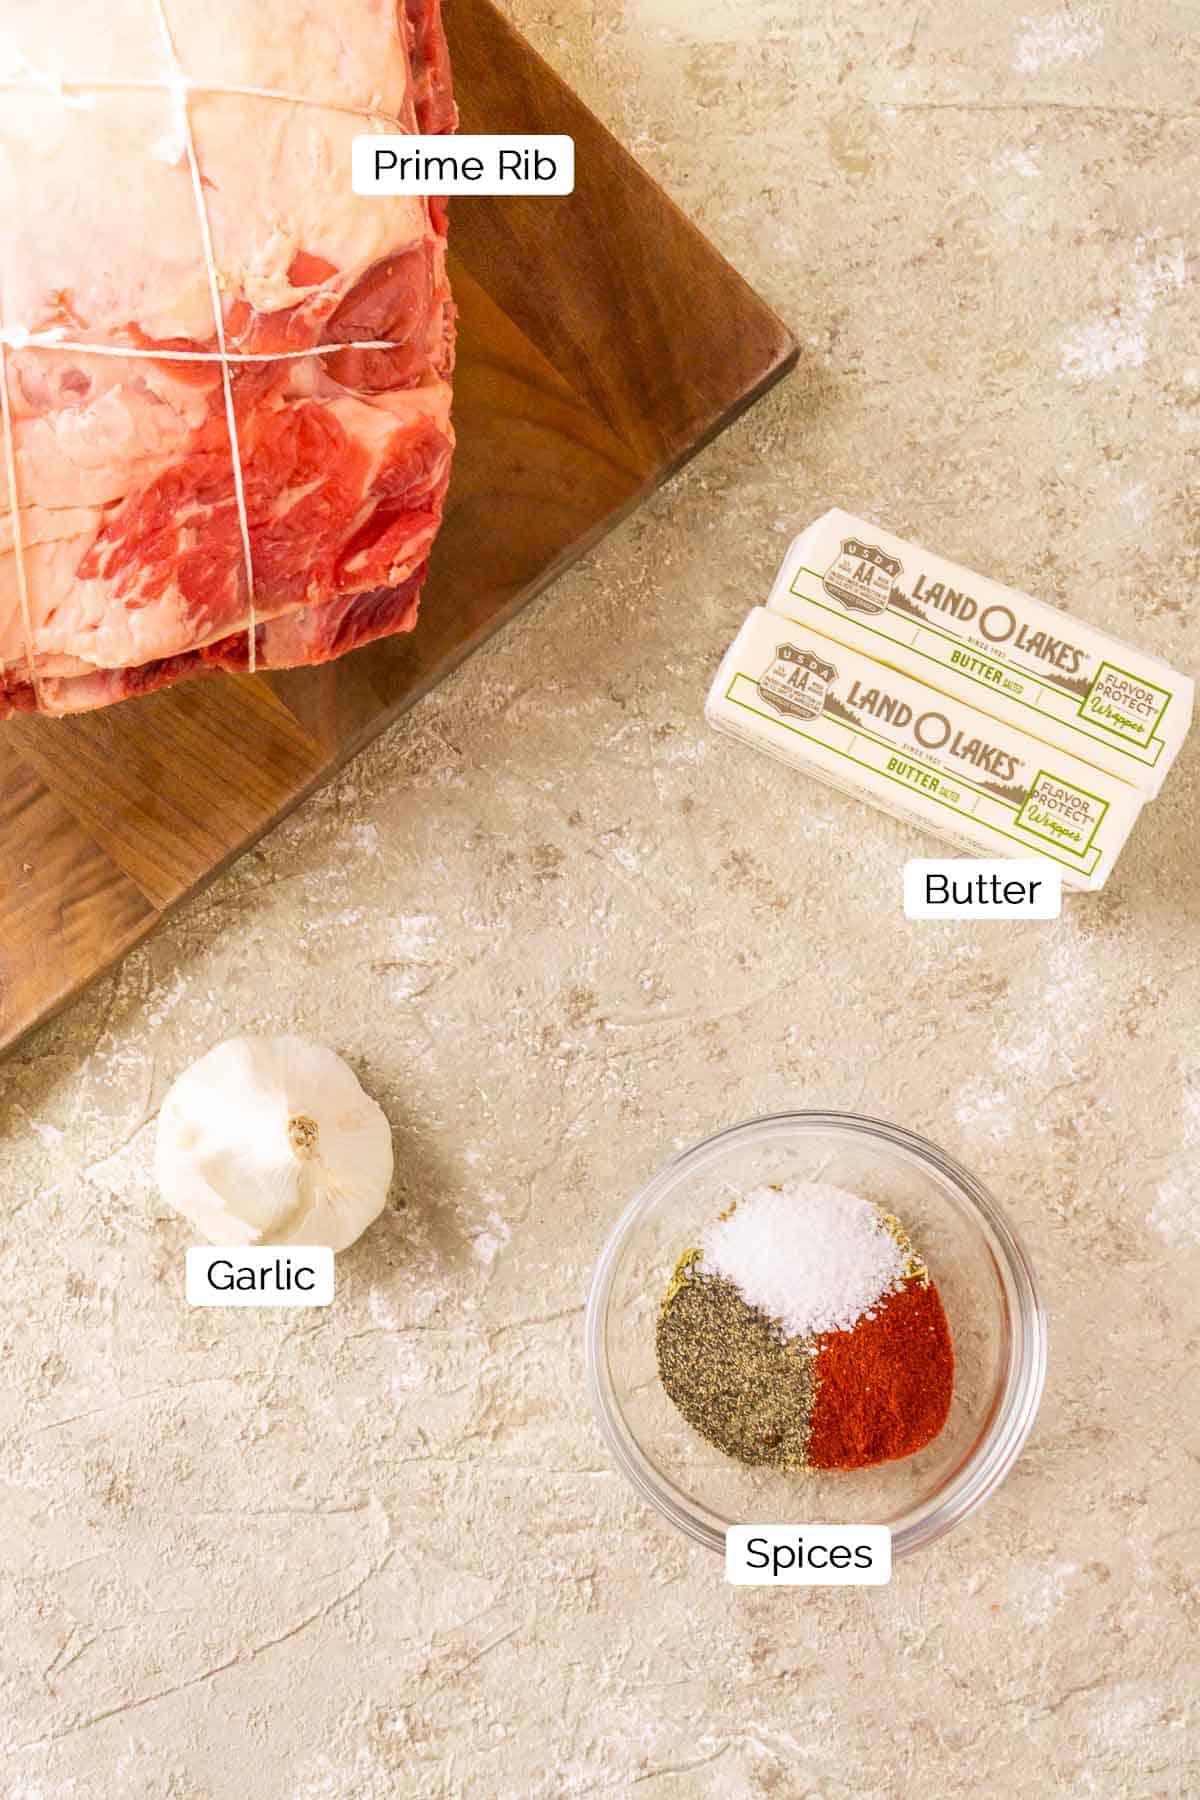 The ingredients on a cream-colored surface with black and white labels by each food item.